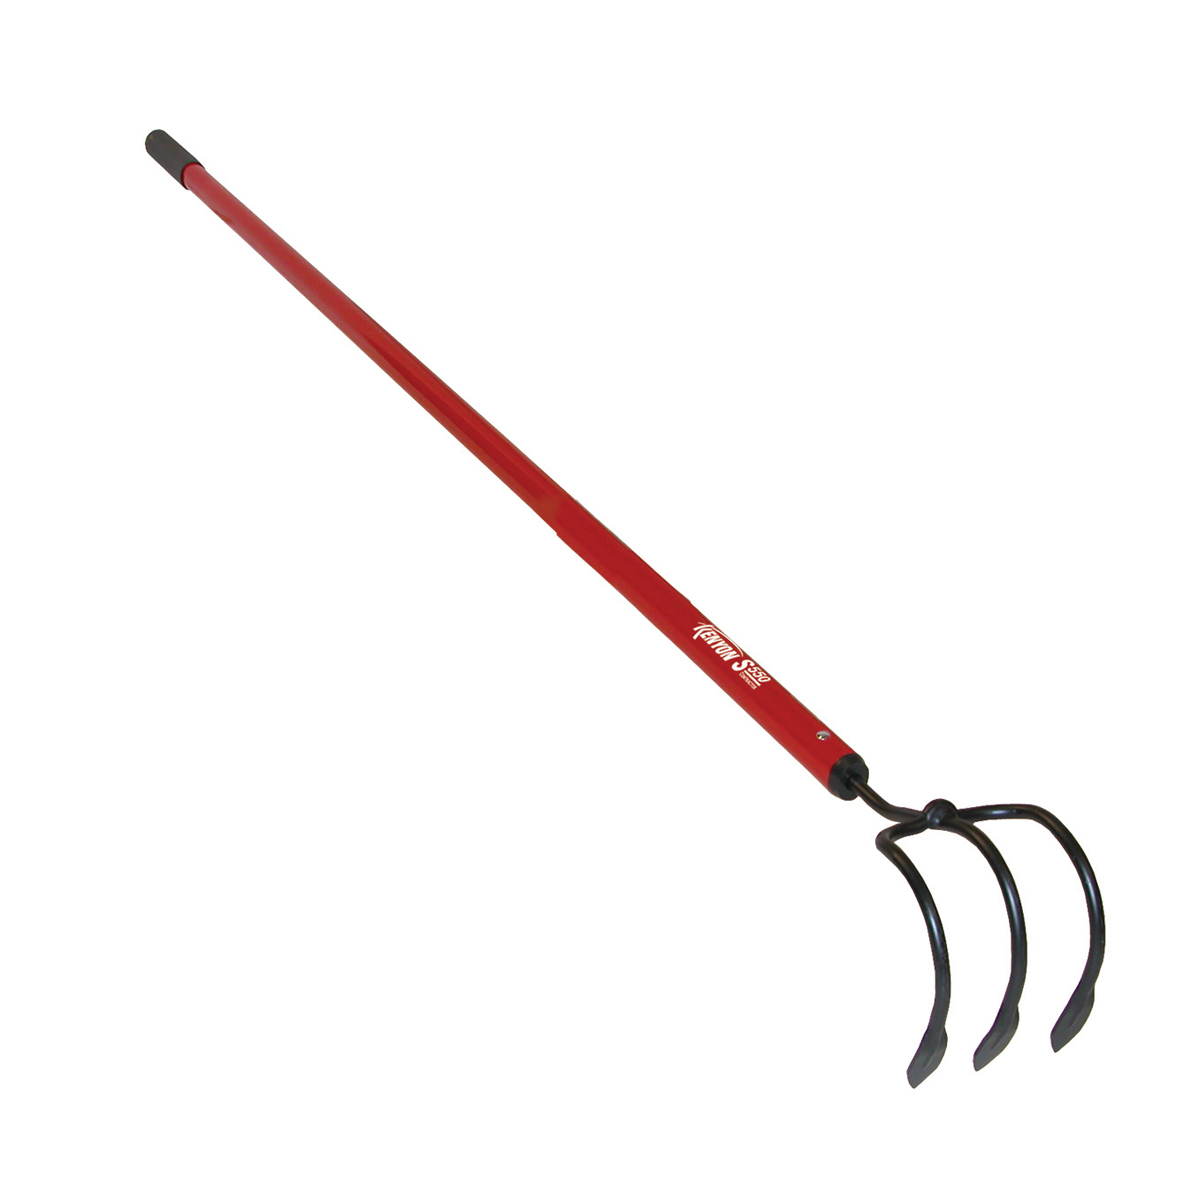 Kenyon 42670 3-Prong Claw Cultivator with 60 Red Aluminum Handle Seymour Midwest 